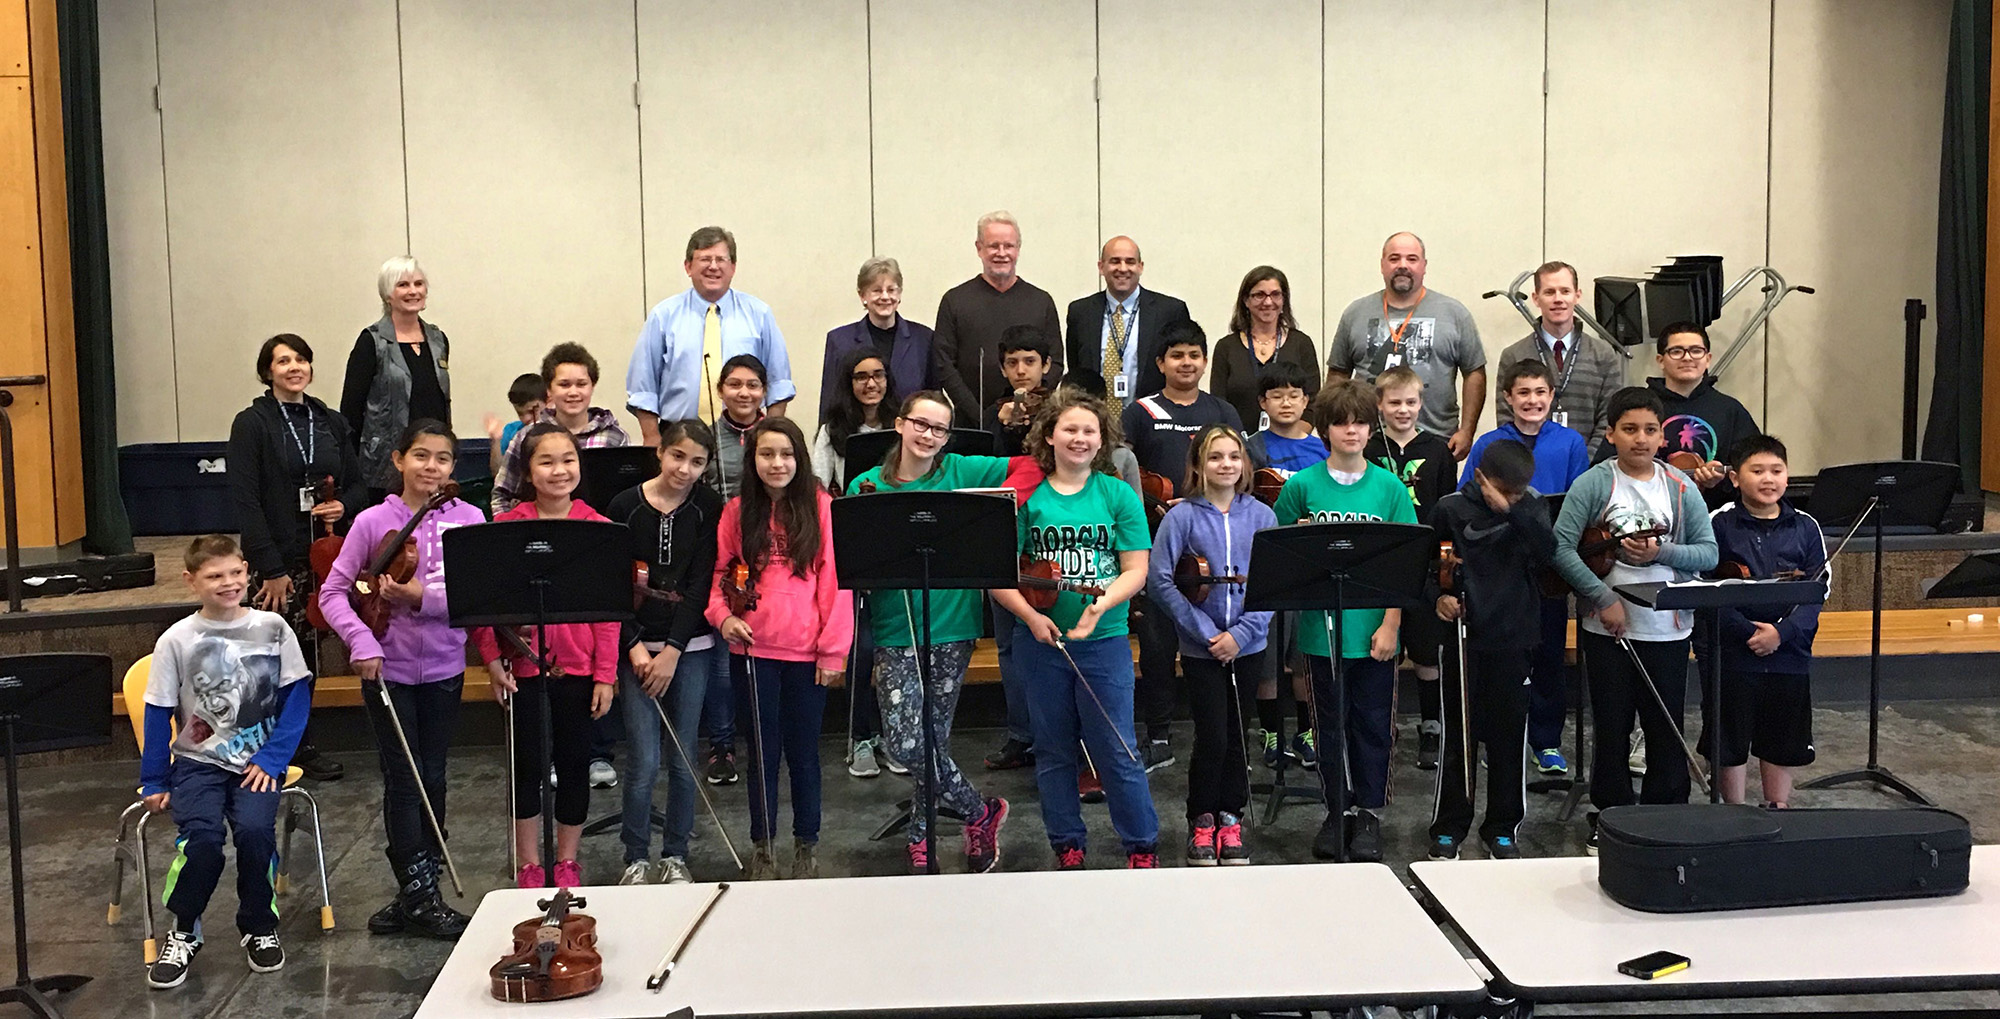 Group photo of the students and faculty of the 5th Grade Strings Program.